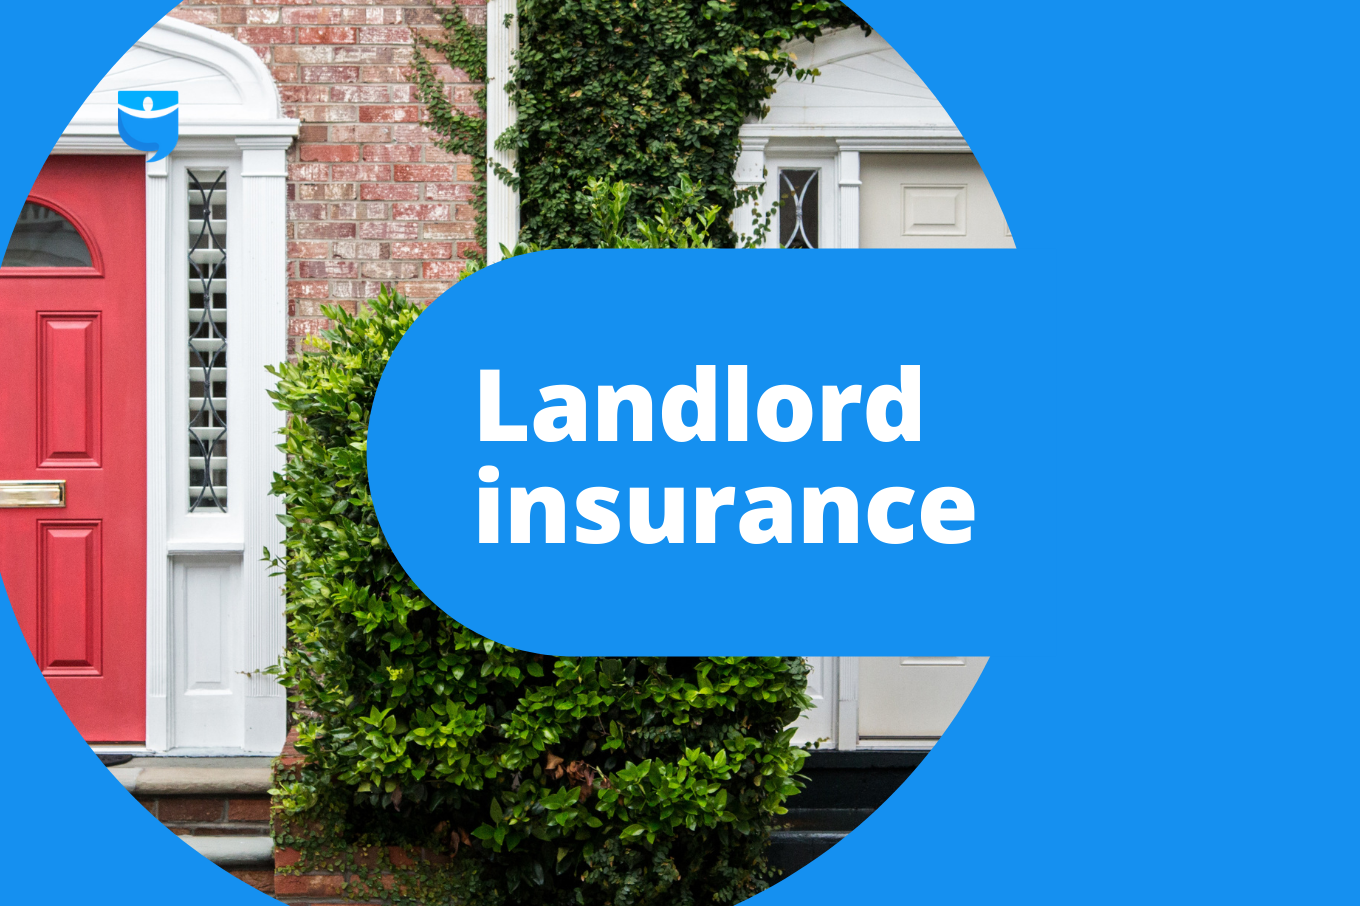 How to Protect Your Property With Landlord Insurance